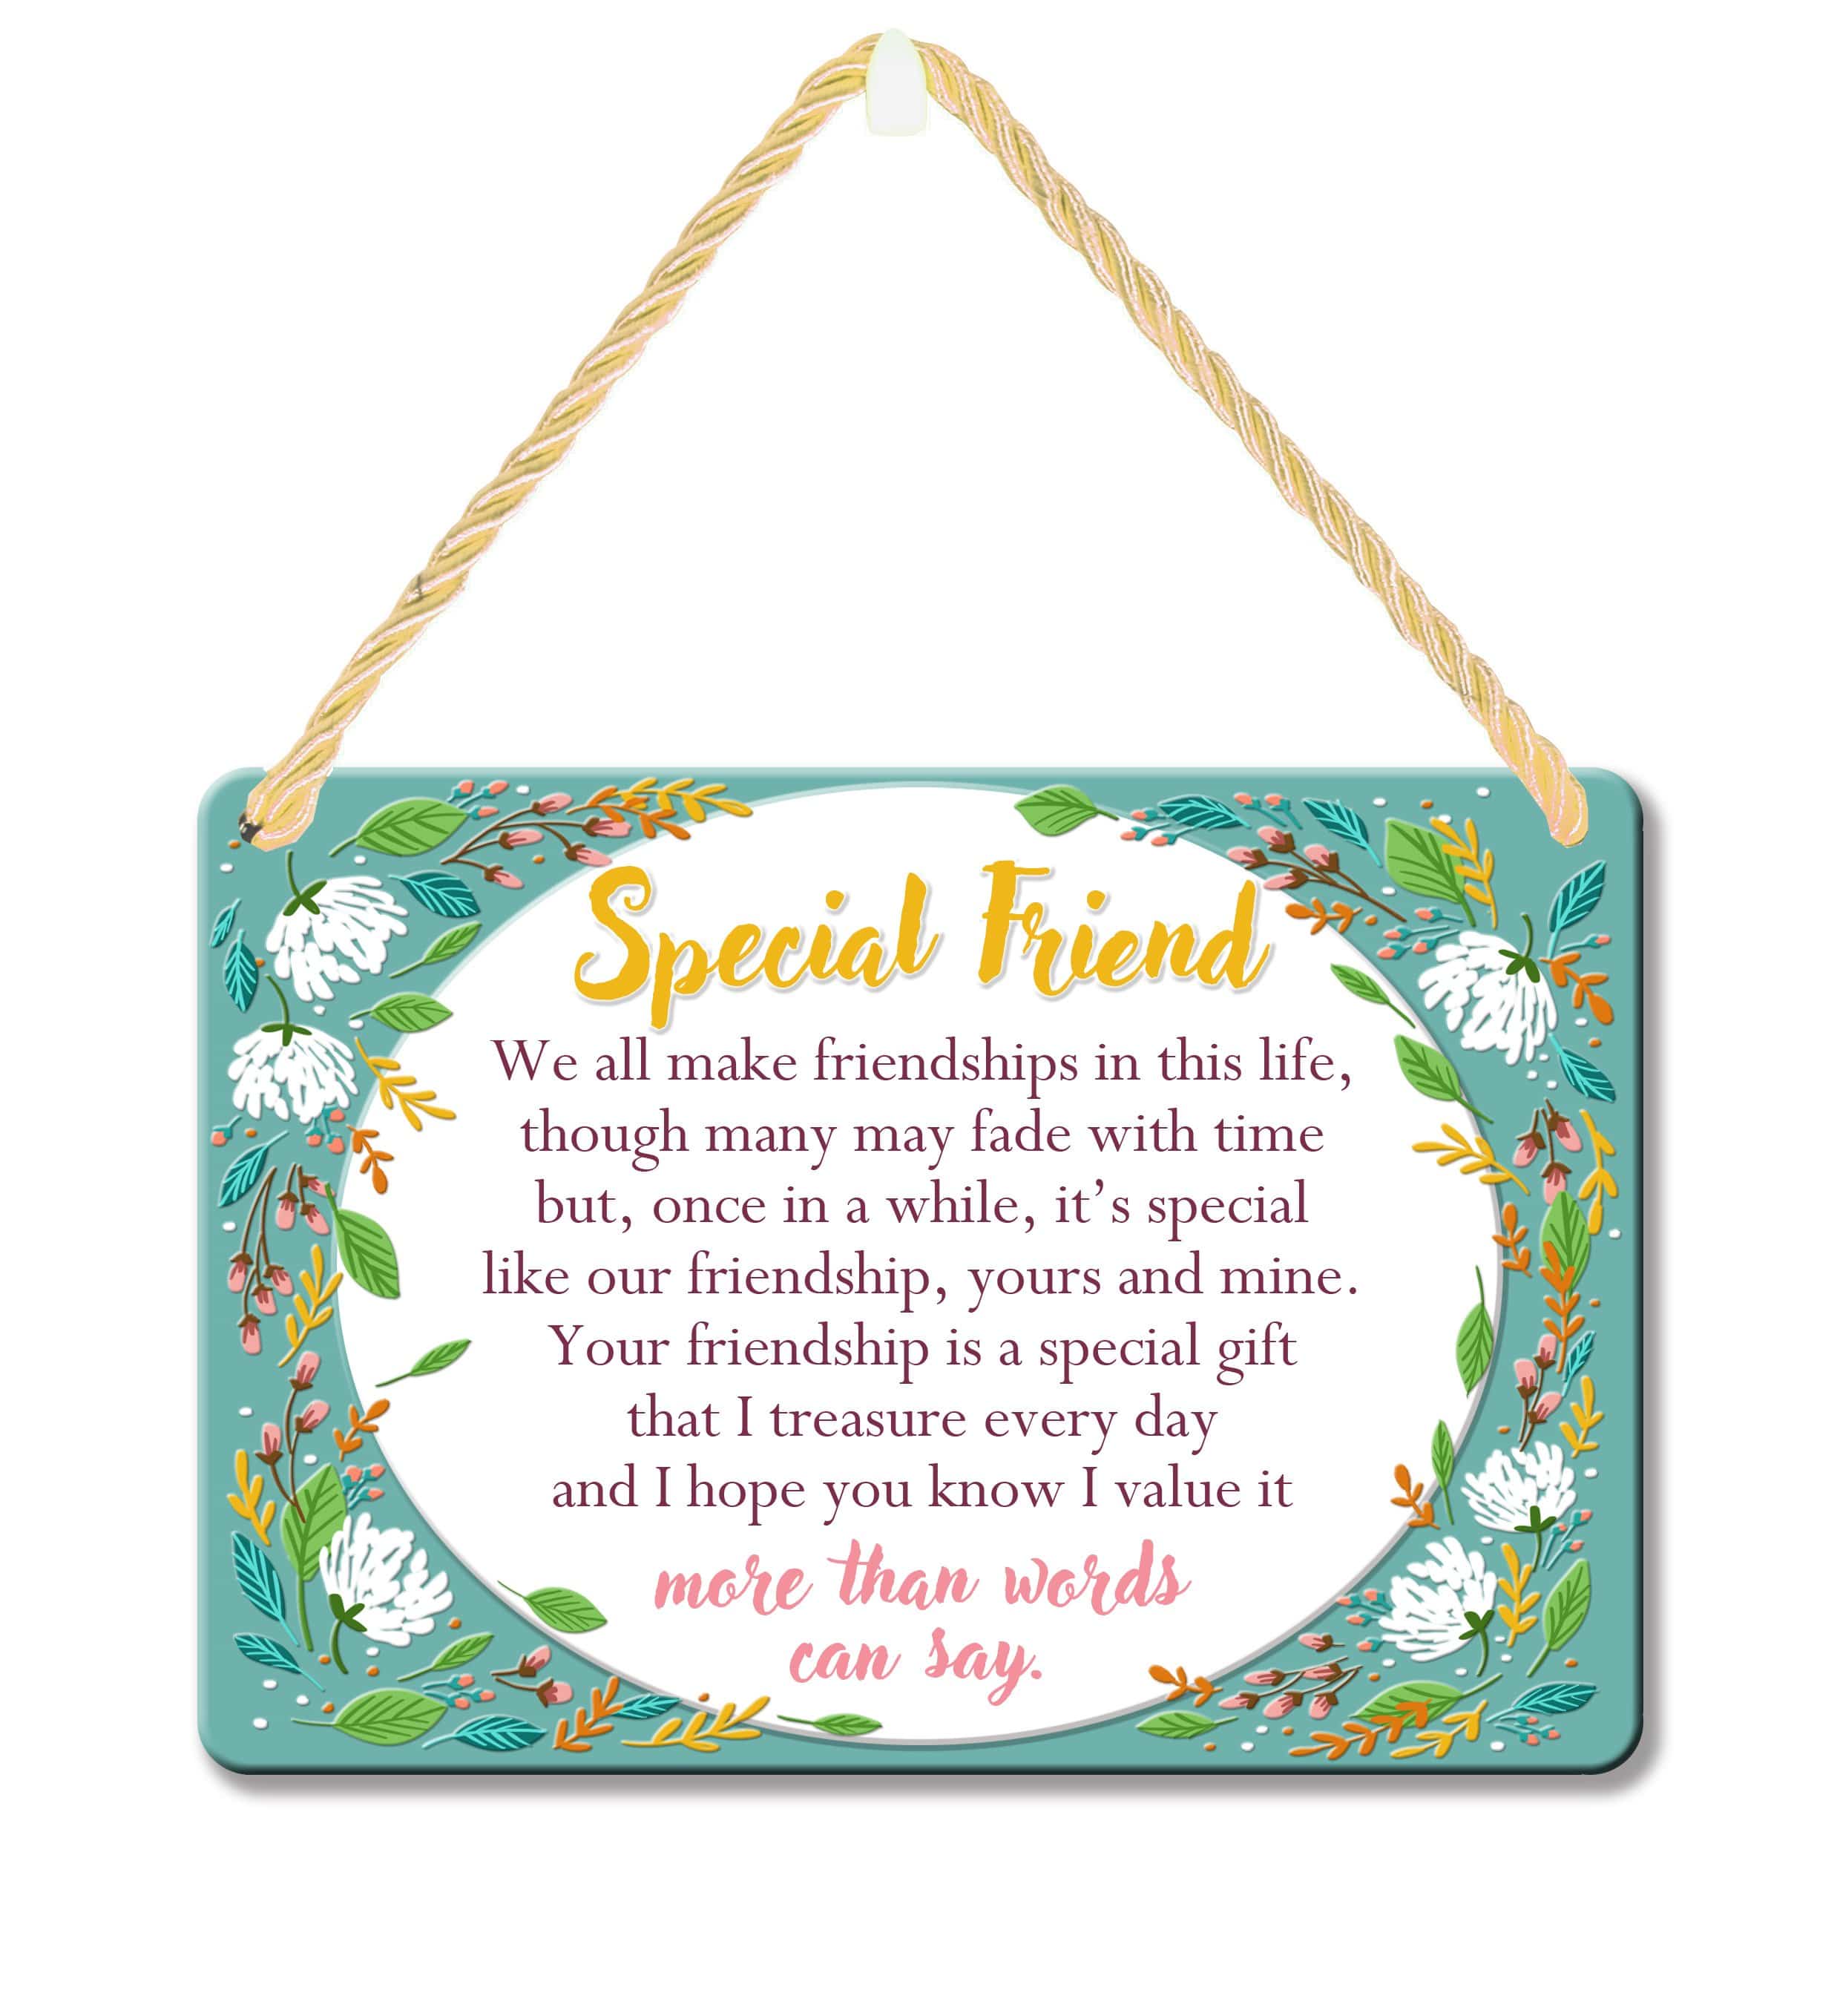 Amazon.com: Best Friend Birthday Gifts for Women, Bff Gifts, Bestie Gifts  for Women, Best Friend Cutting Board, Inspirational Gifts for Women Friends,  Friendship Gifts for Women Friends: Home & Kitchen